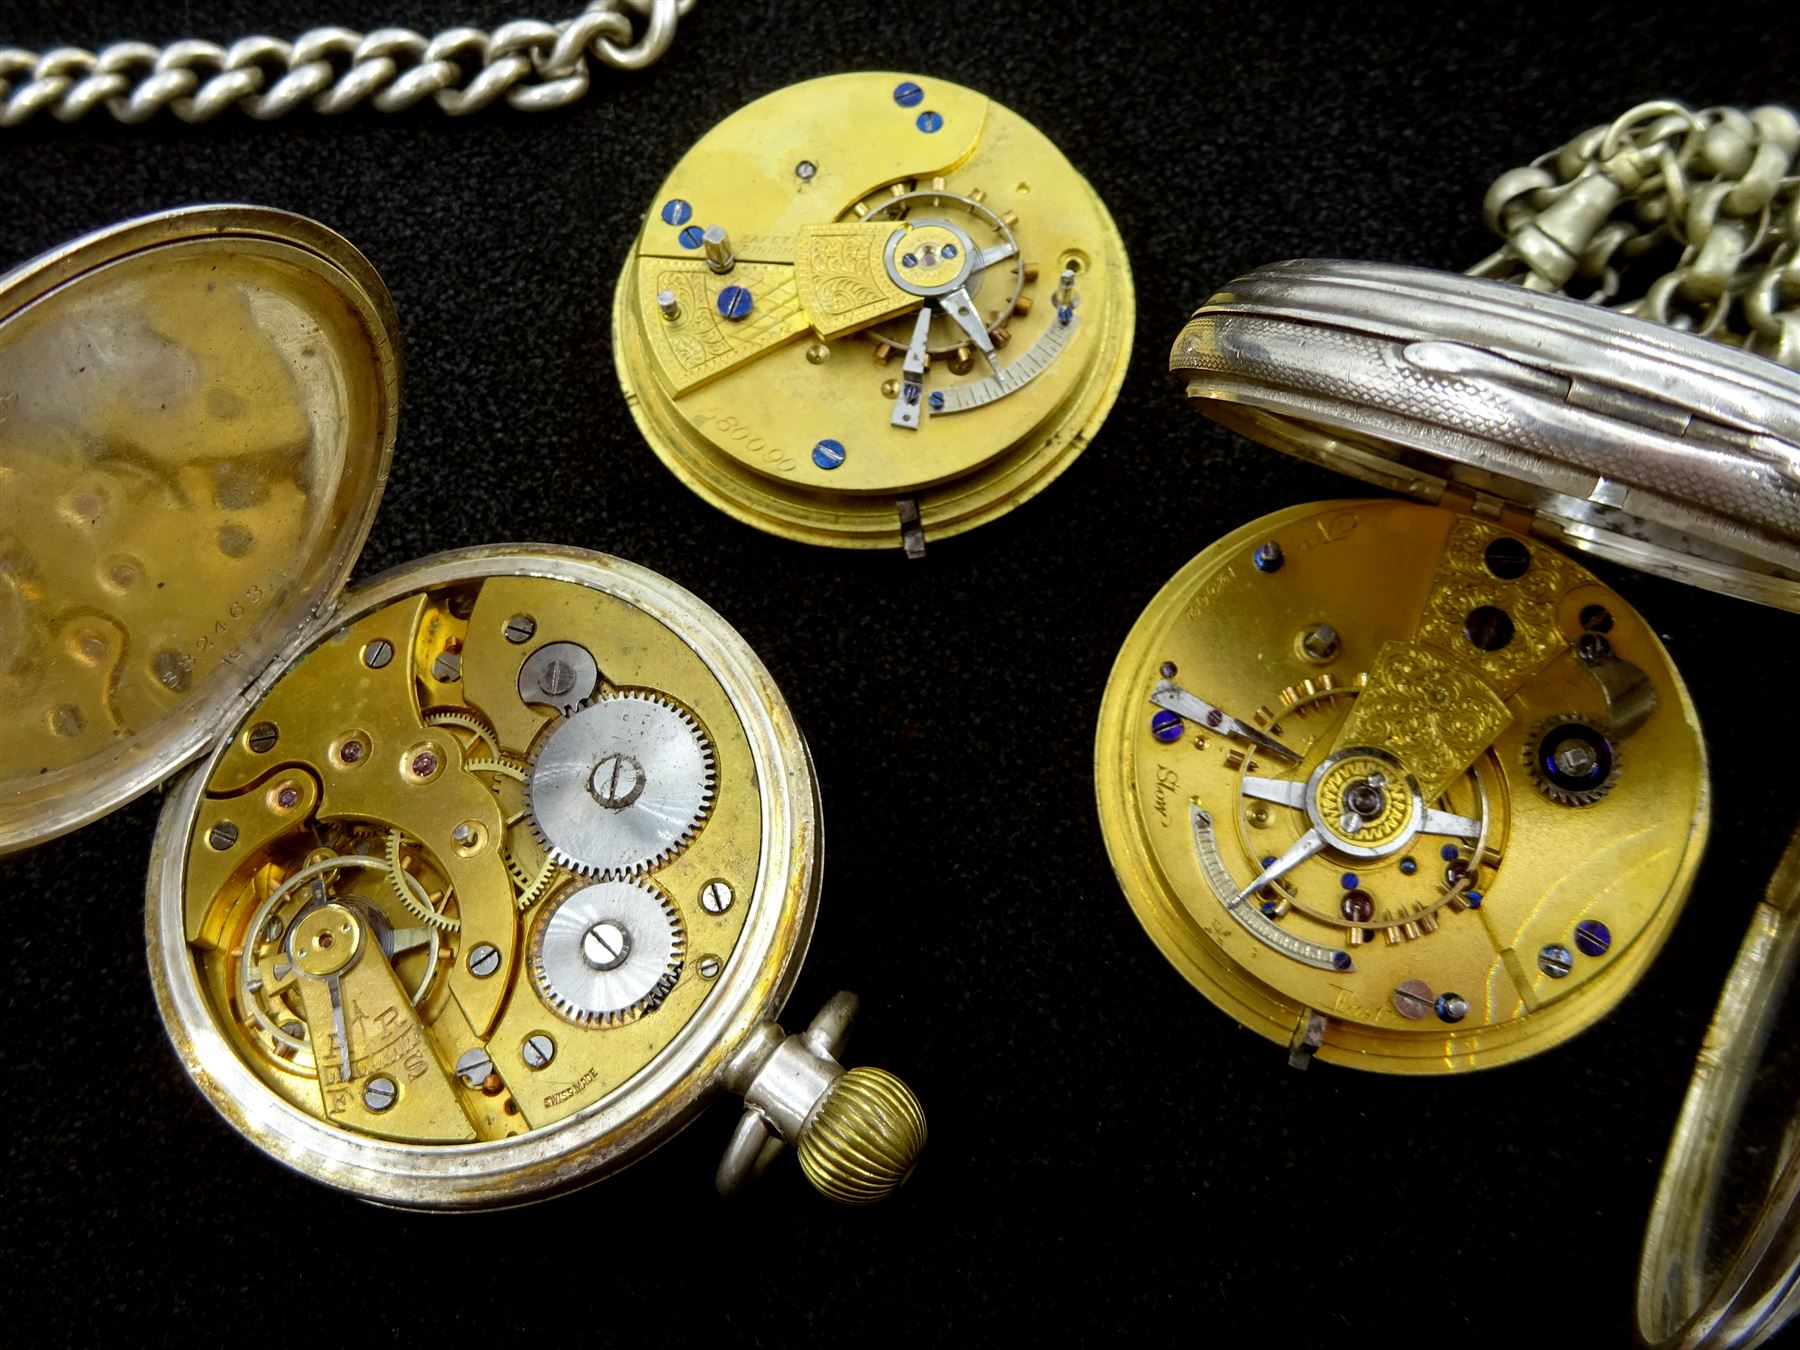 Edwardian silver fusee lever pocket watch by Bravingtons - Image 2 of 3